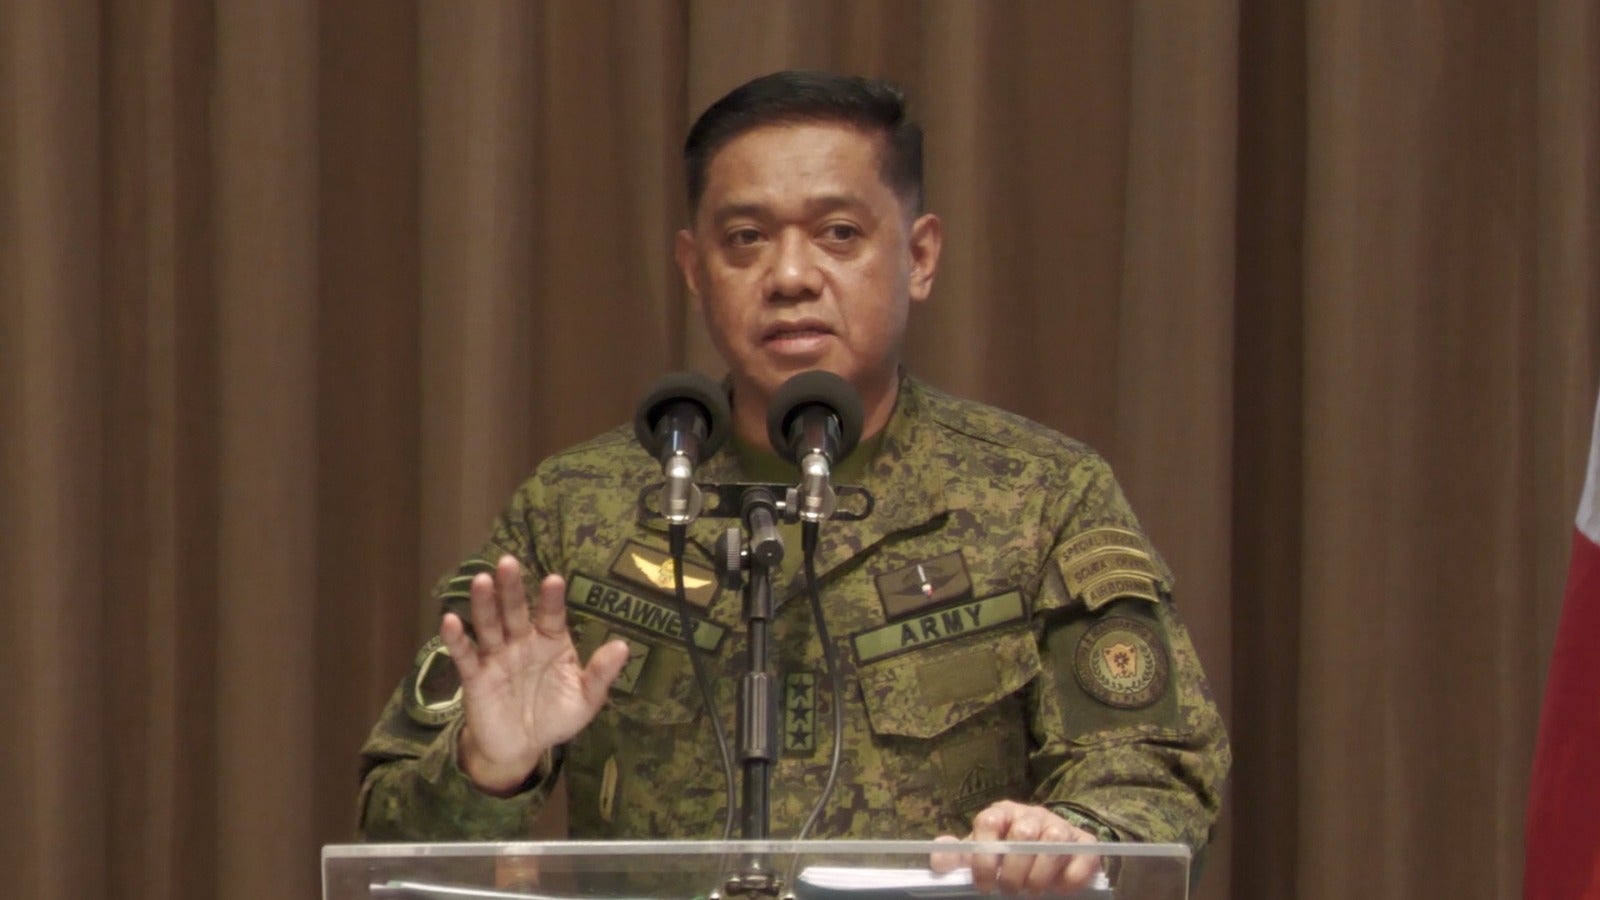 The Philippines and the United States have approved 63 projects inside the nine Enhanced Defense Cooperation Agreement (Edca) sites in the country, according to Armed Forces of the Philippines (AFP) chief General Romeo Brawner.